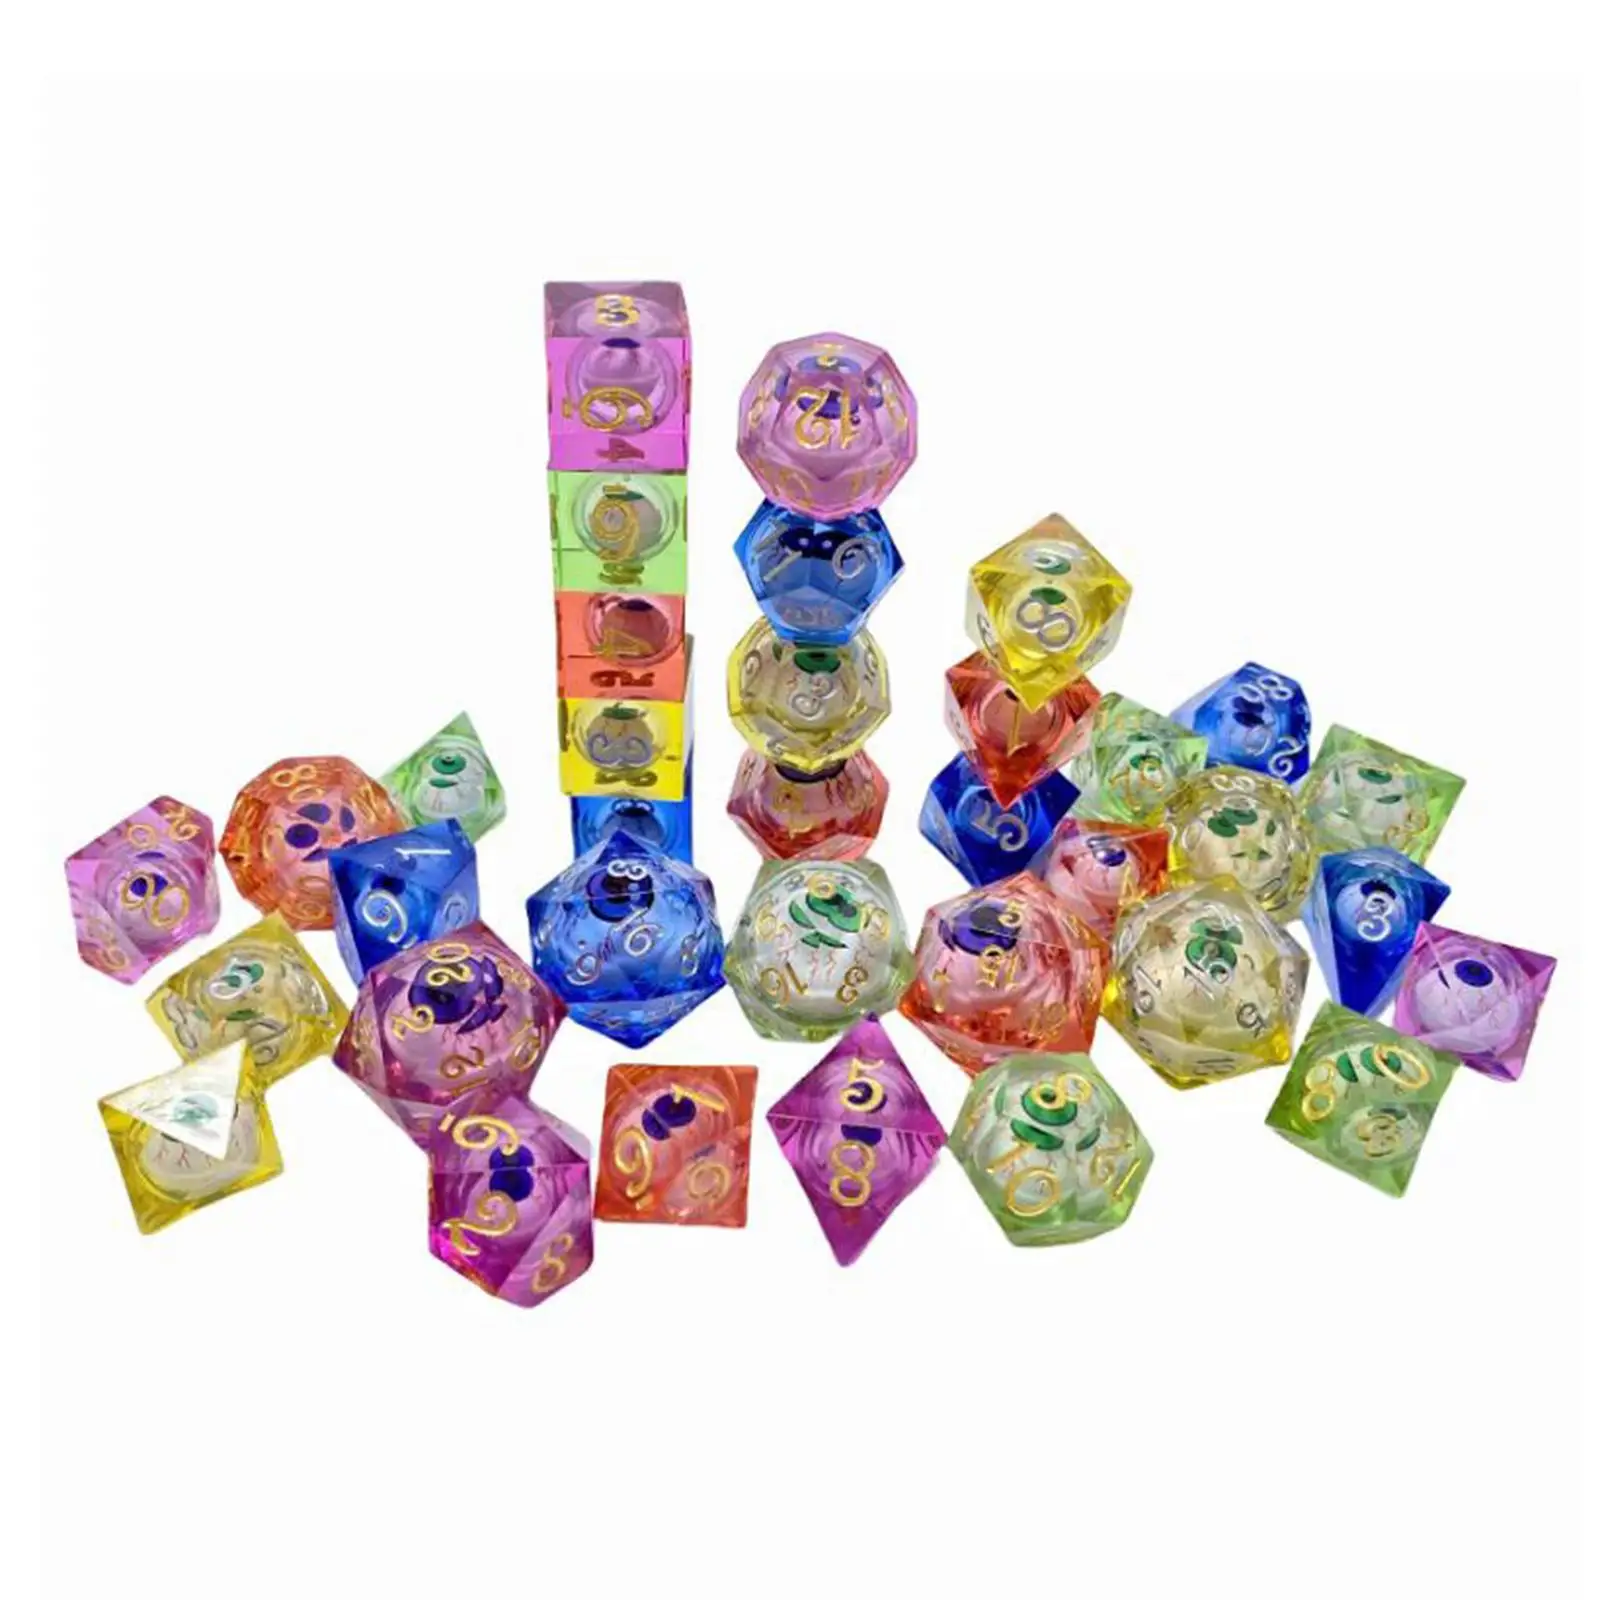 7x Resin Dices Set Multi Side Dice Set Family Games Accessaries for Party Favors Math Learning Table Board Wedding